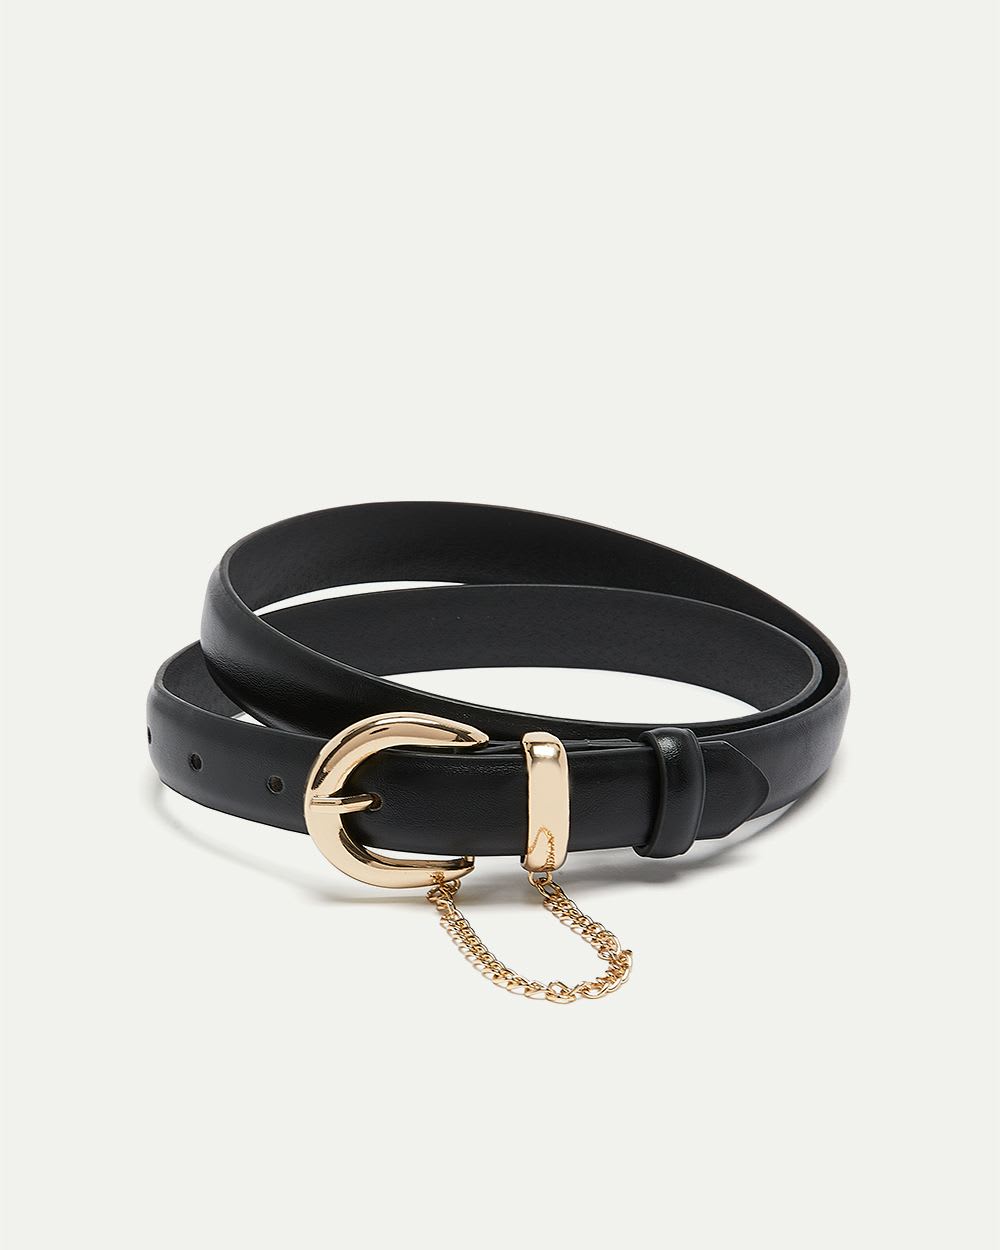 Faux Leather Belt with Hanging Chain Buckle | Regular | Reitmans